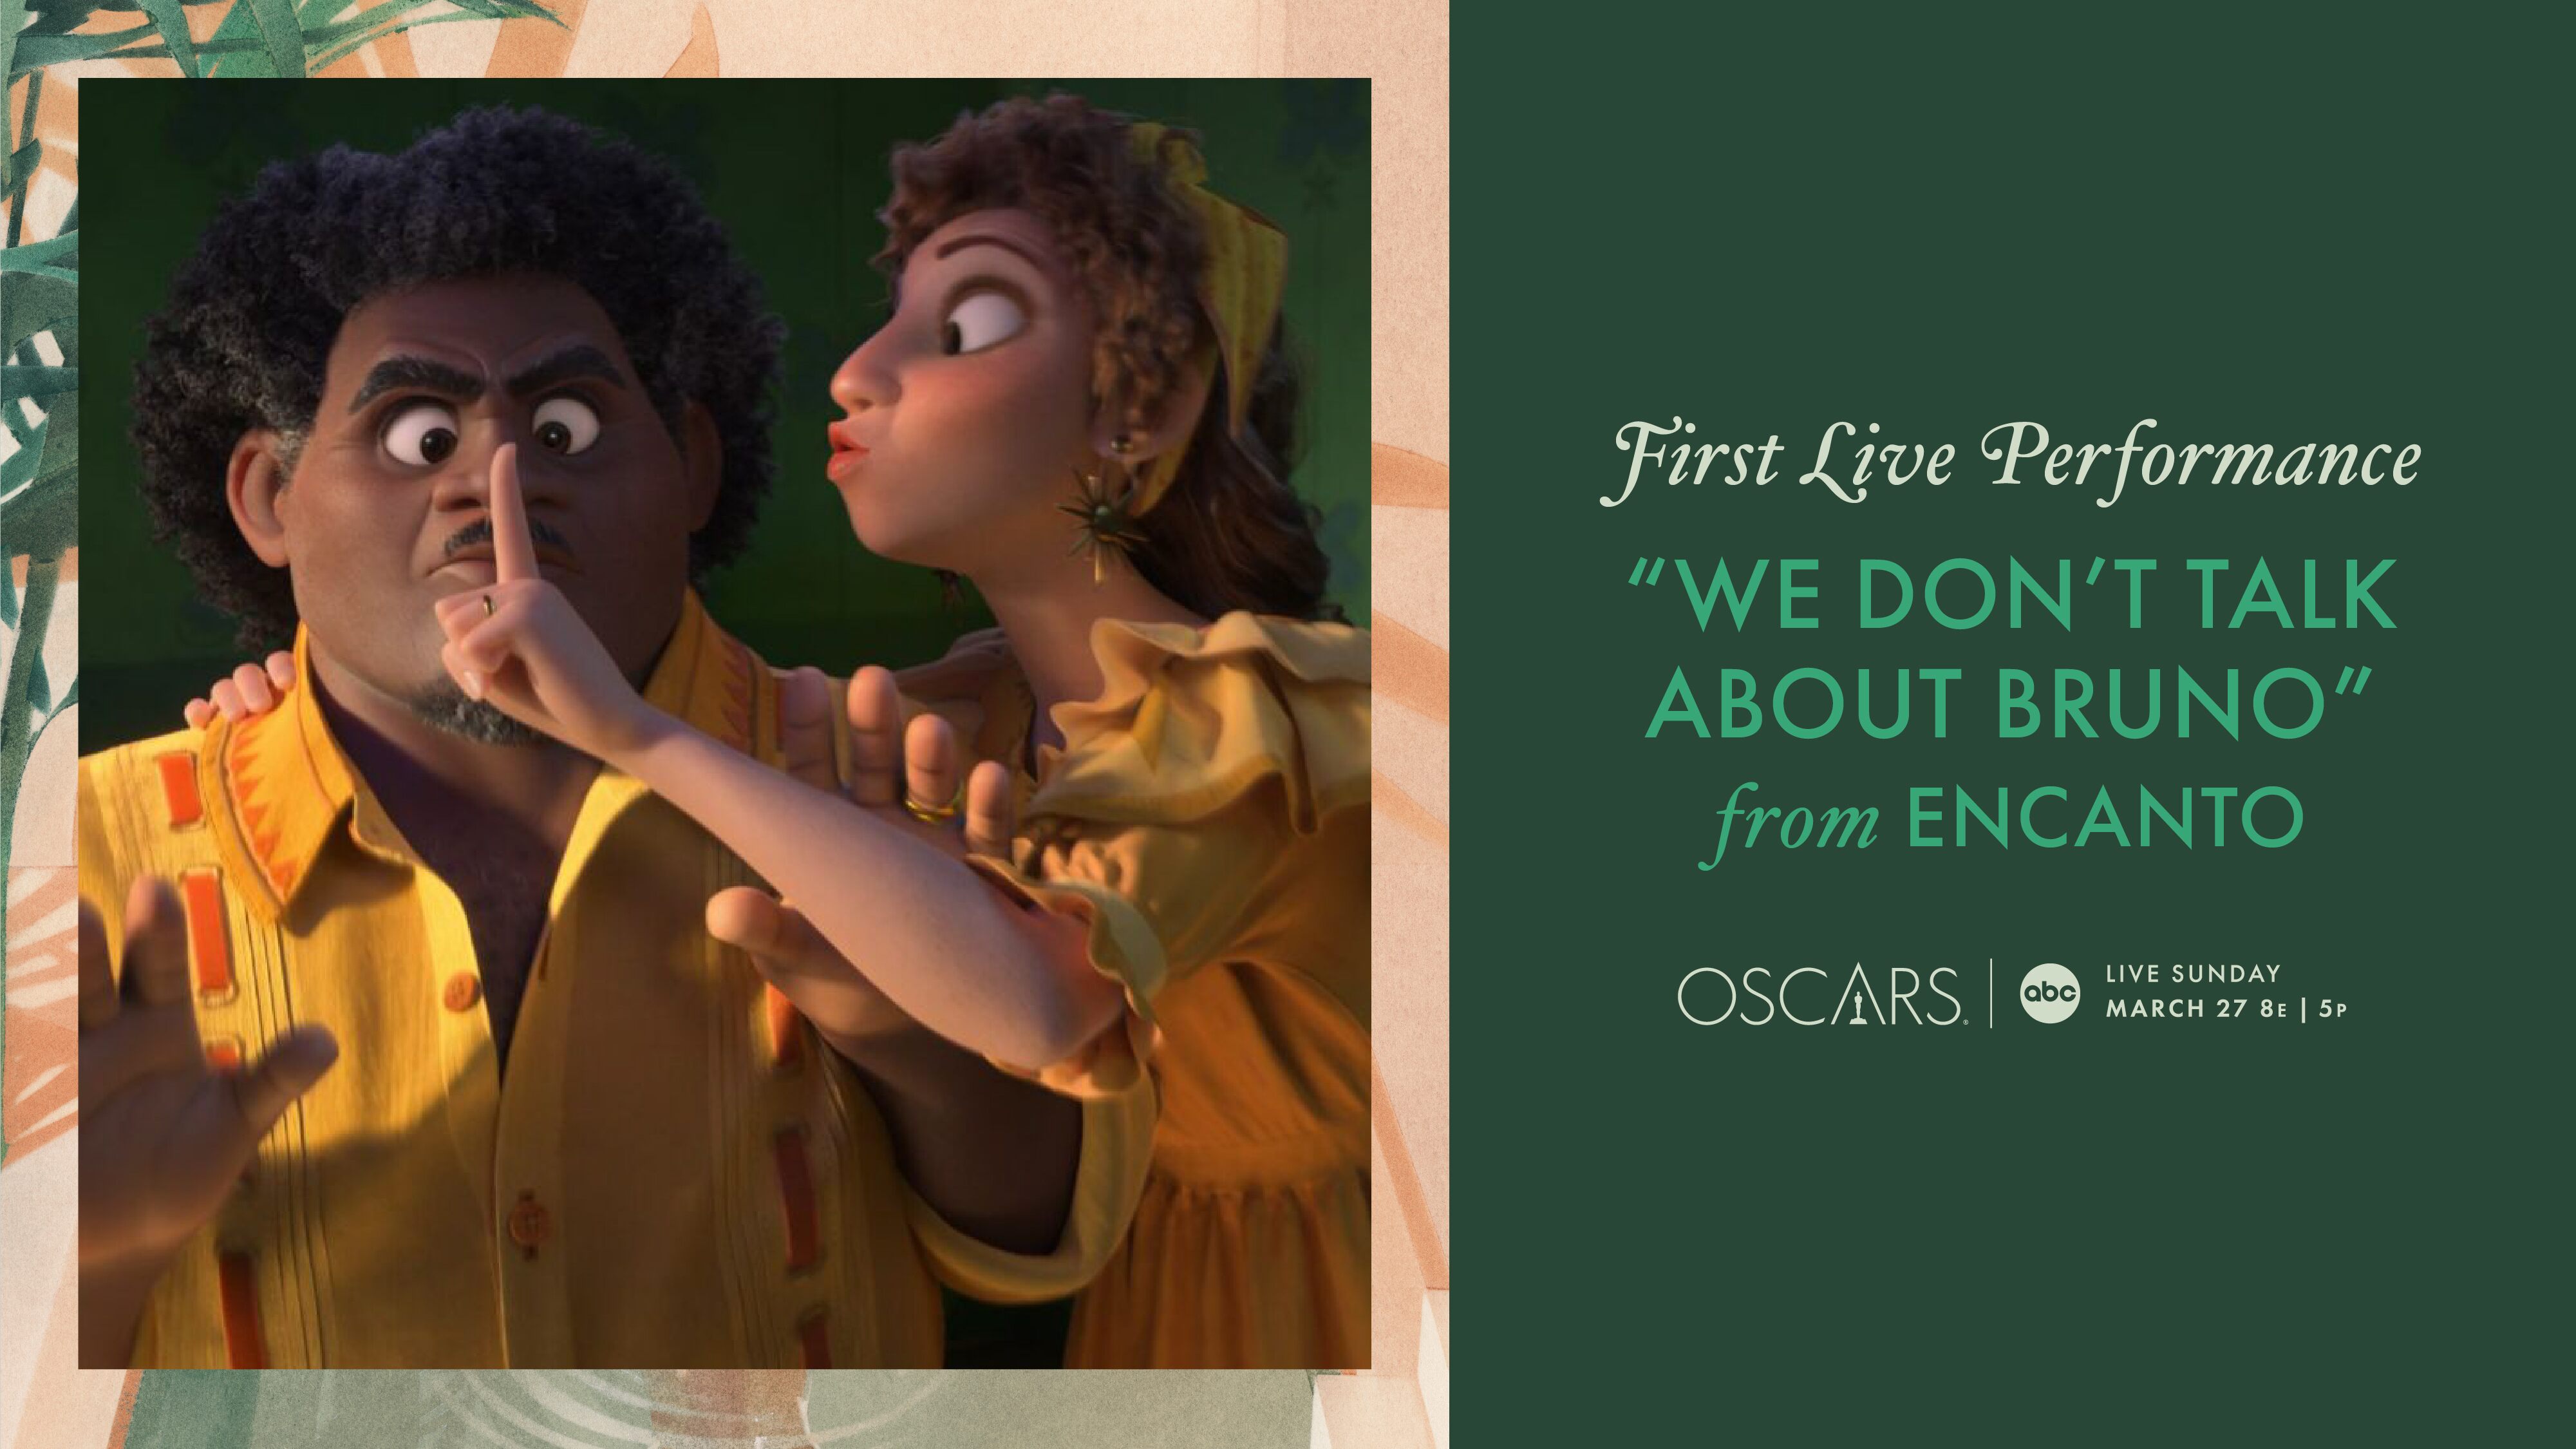 94TH OSCARS TO FEATURE FIRST LIVE PERFORMANCE OF “WE DON’T TALK ABOUT BRUNO” FROM “ENCANTO”